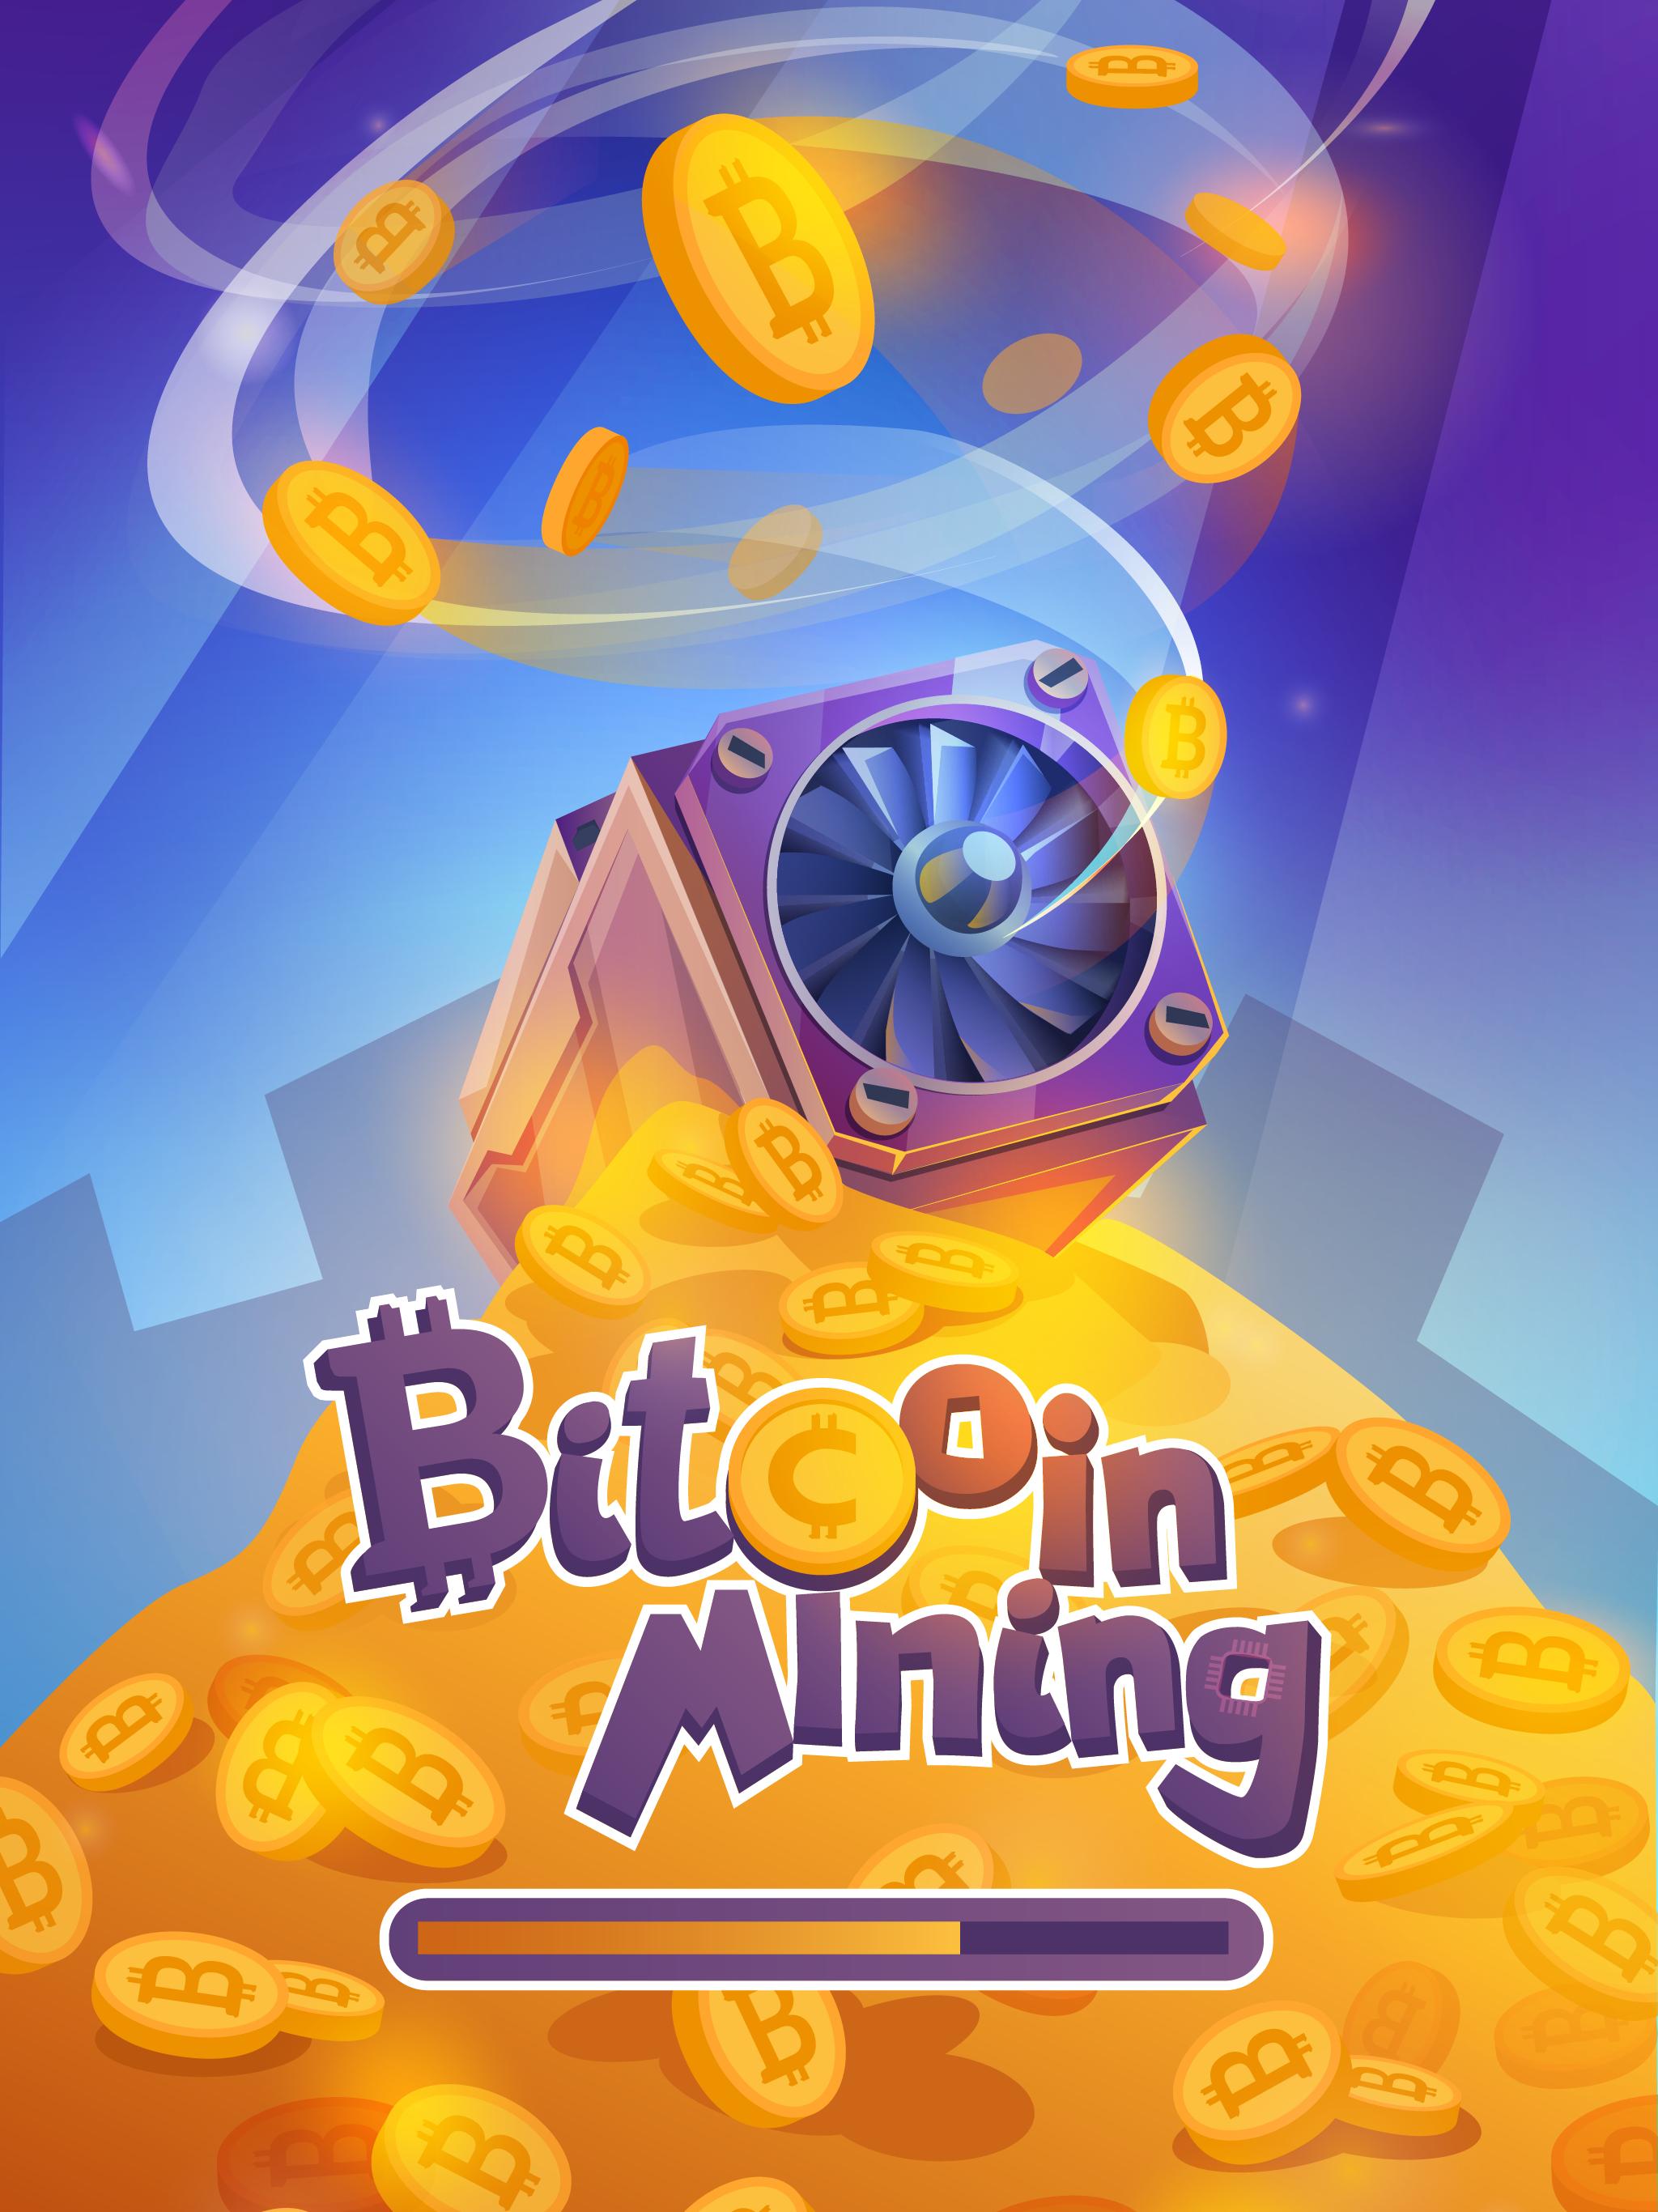 Bitcoin mining: life tycoon, idle miner simulator for ...